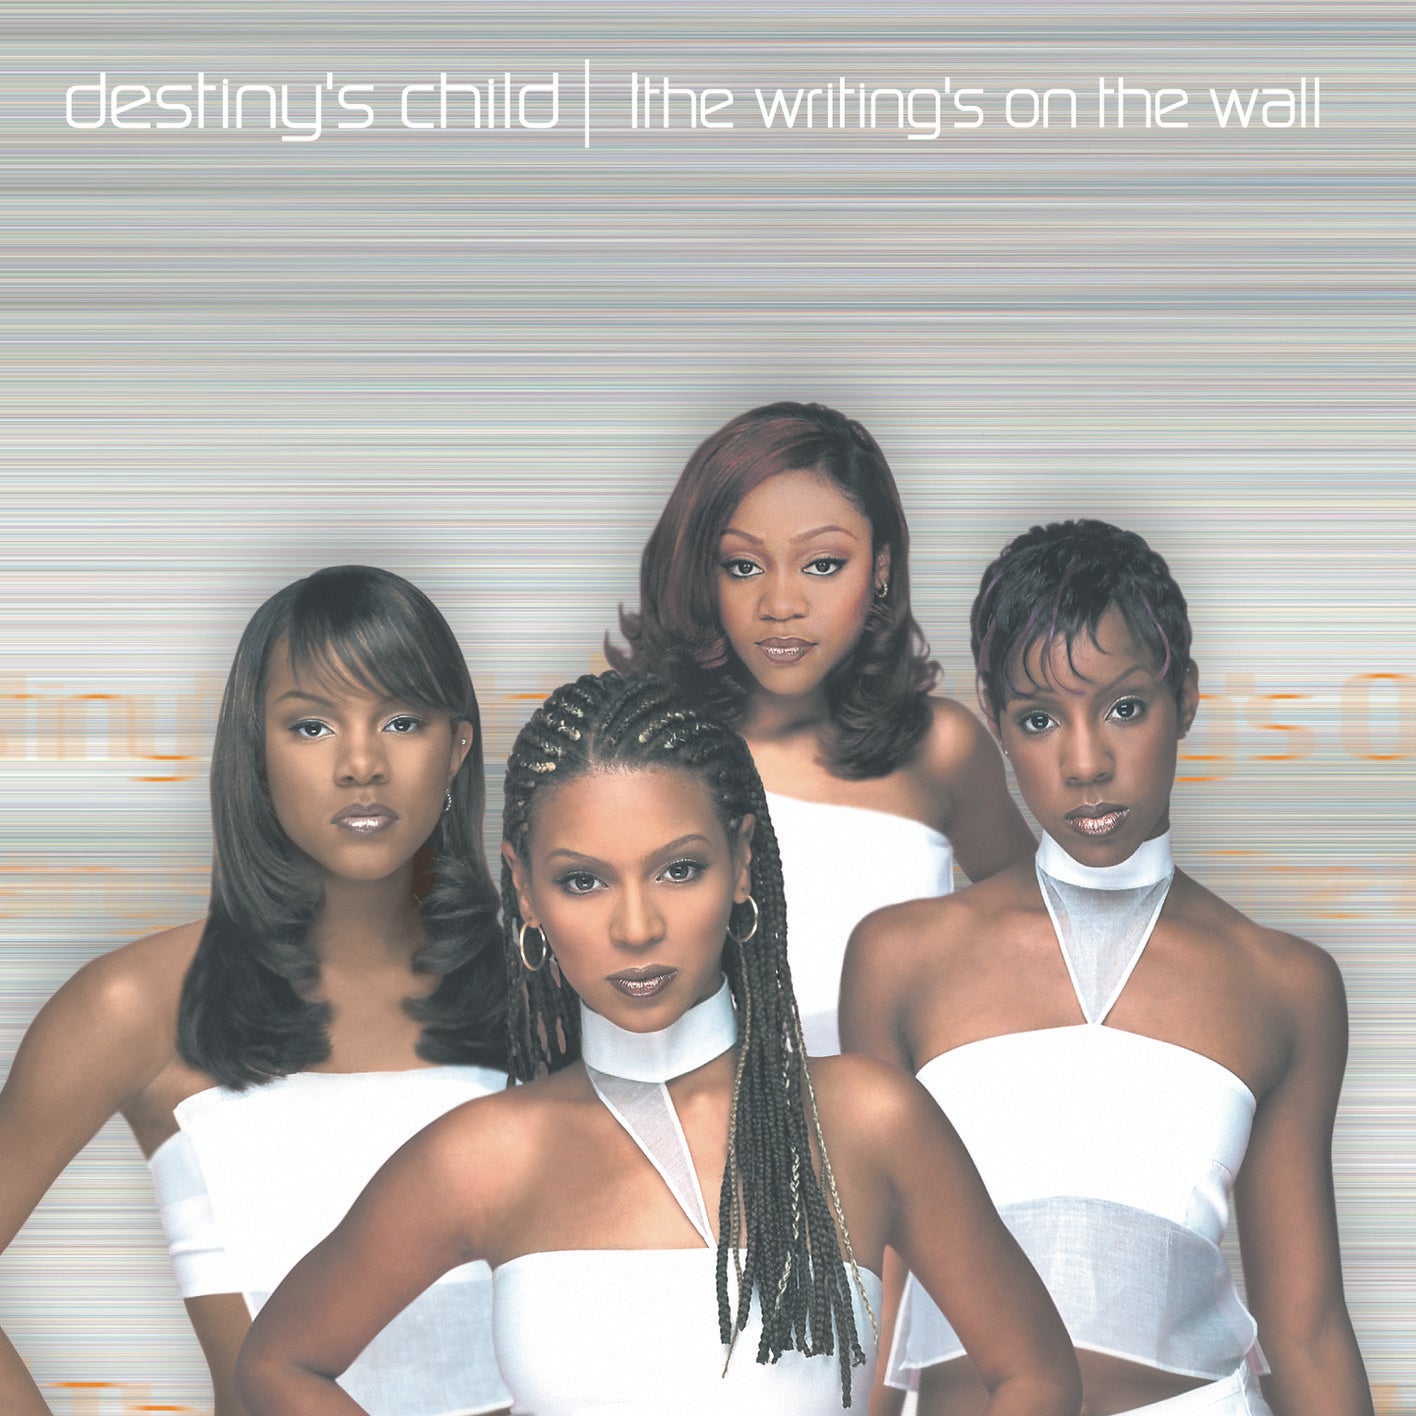 7 Relationship Rules We Learned From Destiny’s Child ‘The Writing’s On The Wall’